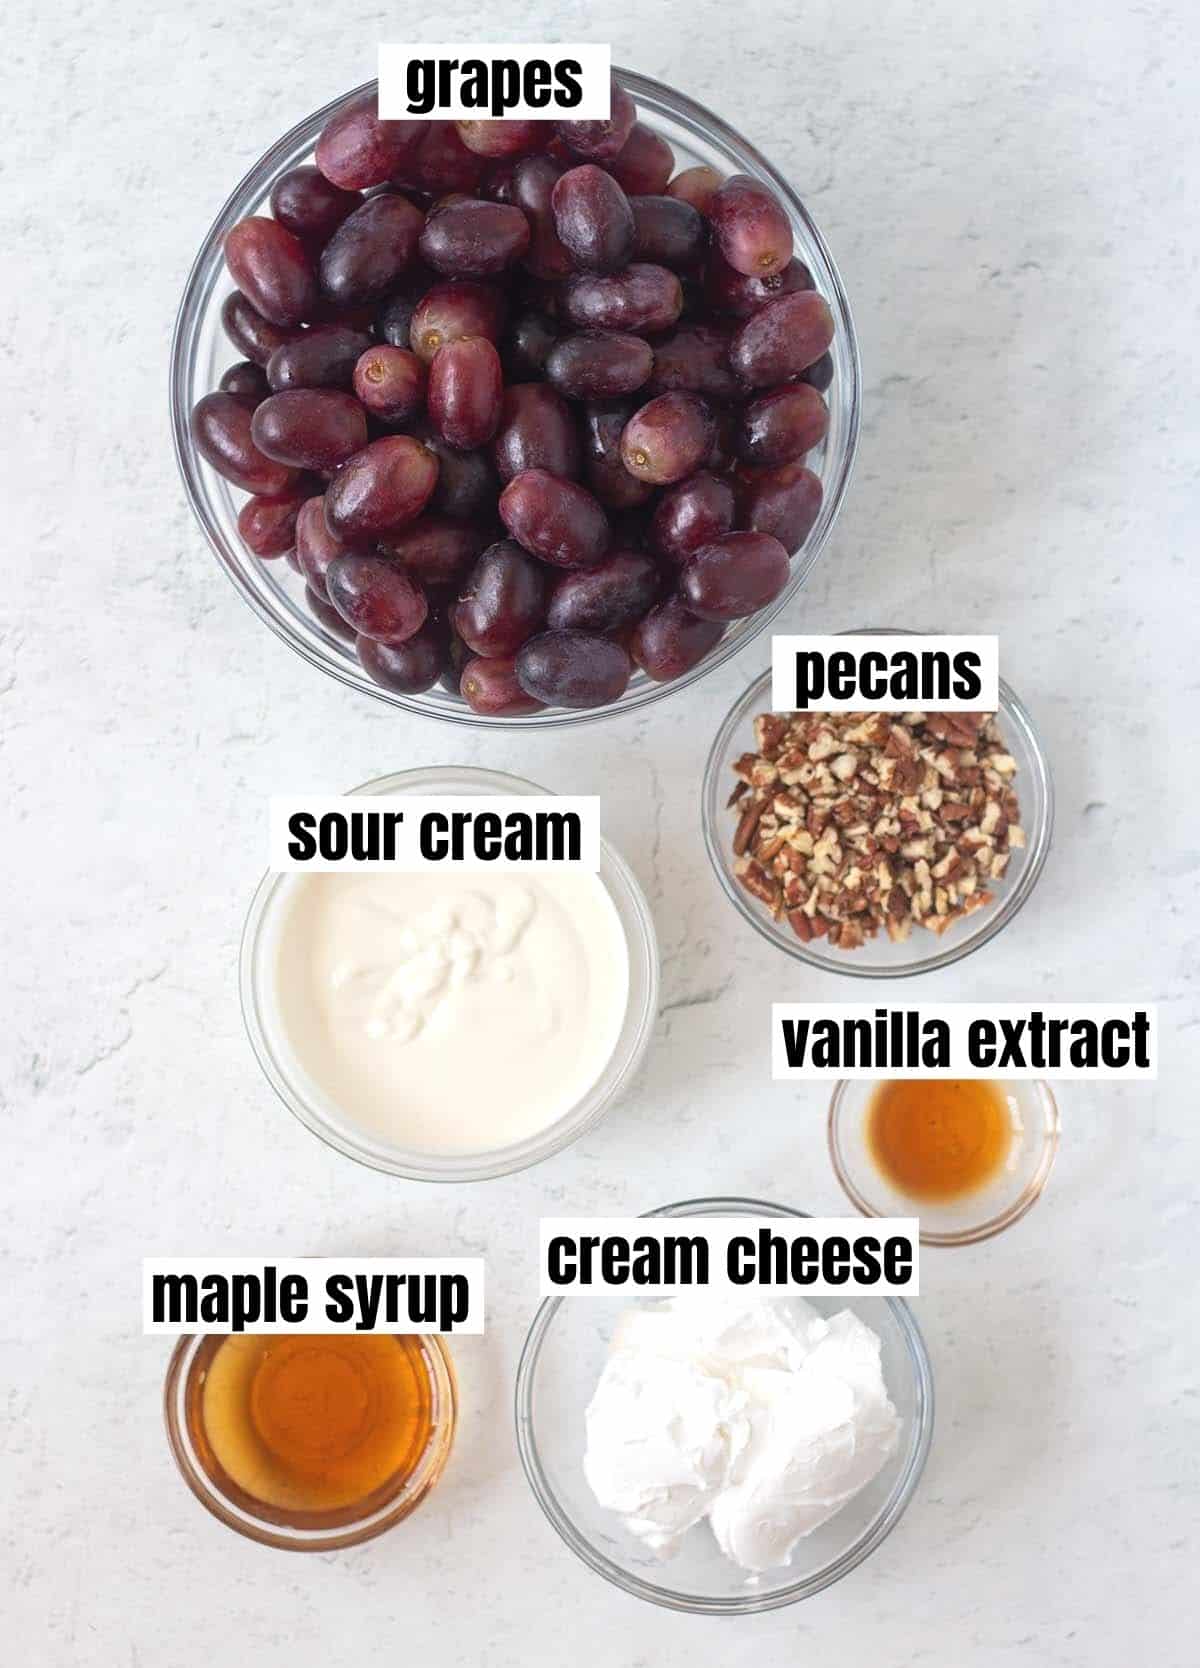 grape salad ingredients including red grapes, sour cream, chopped pecans, vanilla extract, maple syrup, & cream cheese.